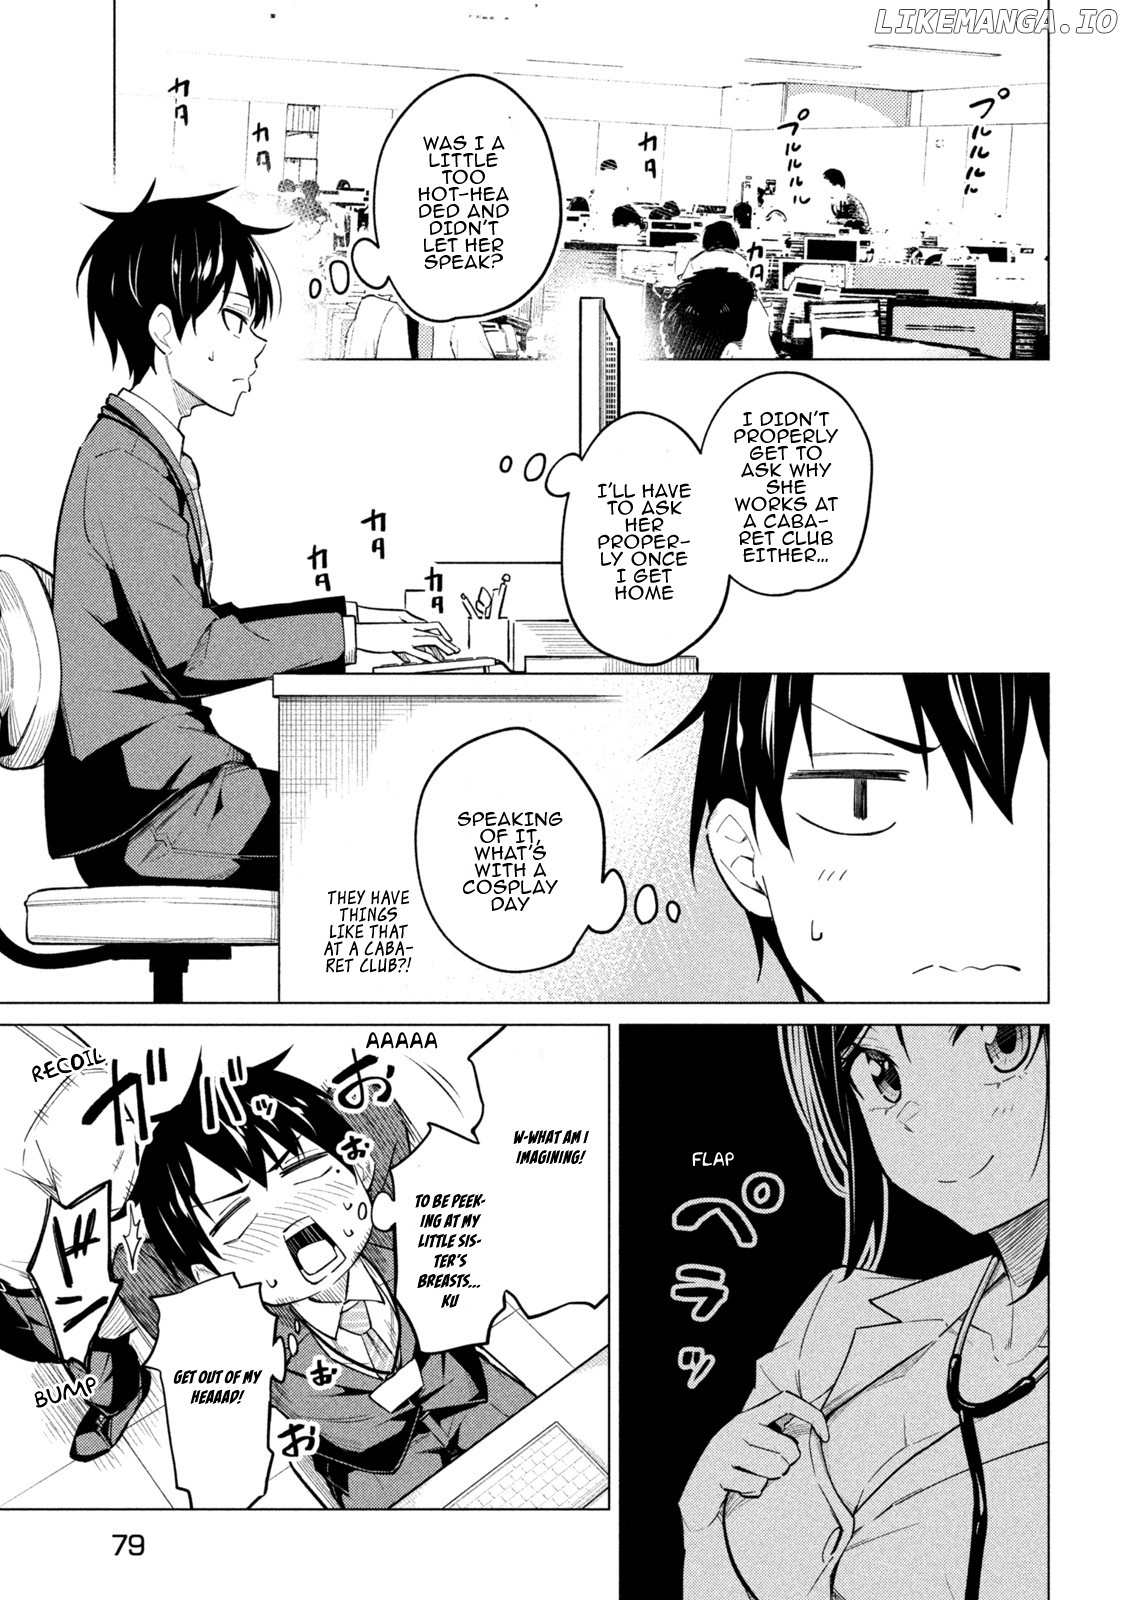 Home Cabaret ~Operation: Making a Cabaret Club at Home so Nii-chan Can Get Used to Girls chapter 2 - page 12